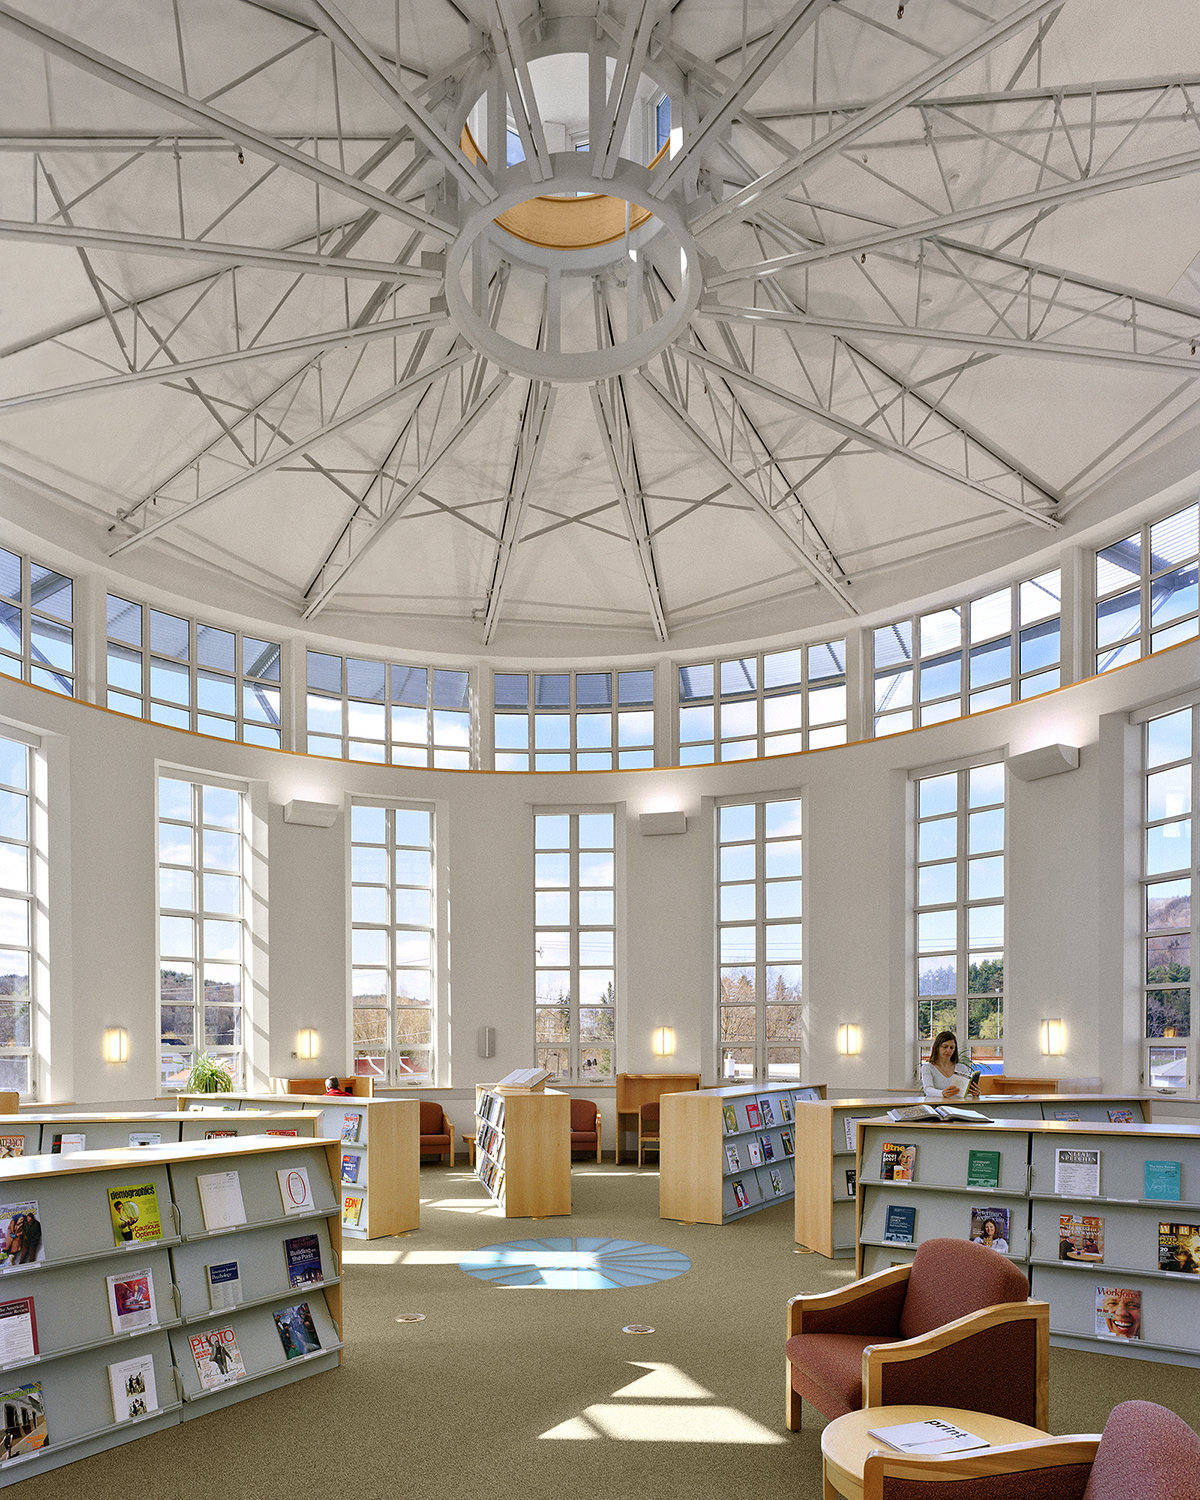 6 tskp winsted northwestern ct community college learning and resources center and library interior view of rotunda inside library 1400 xxx q85